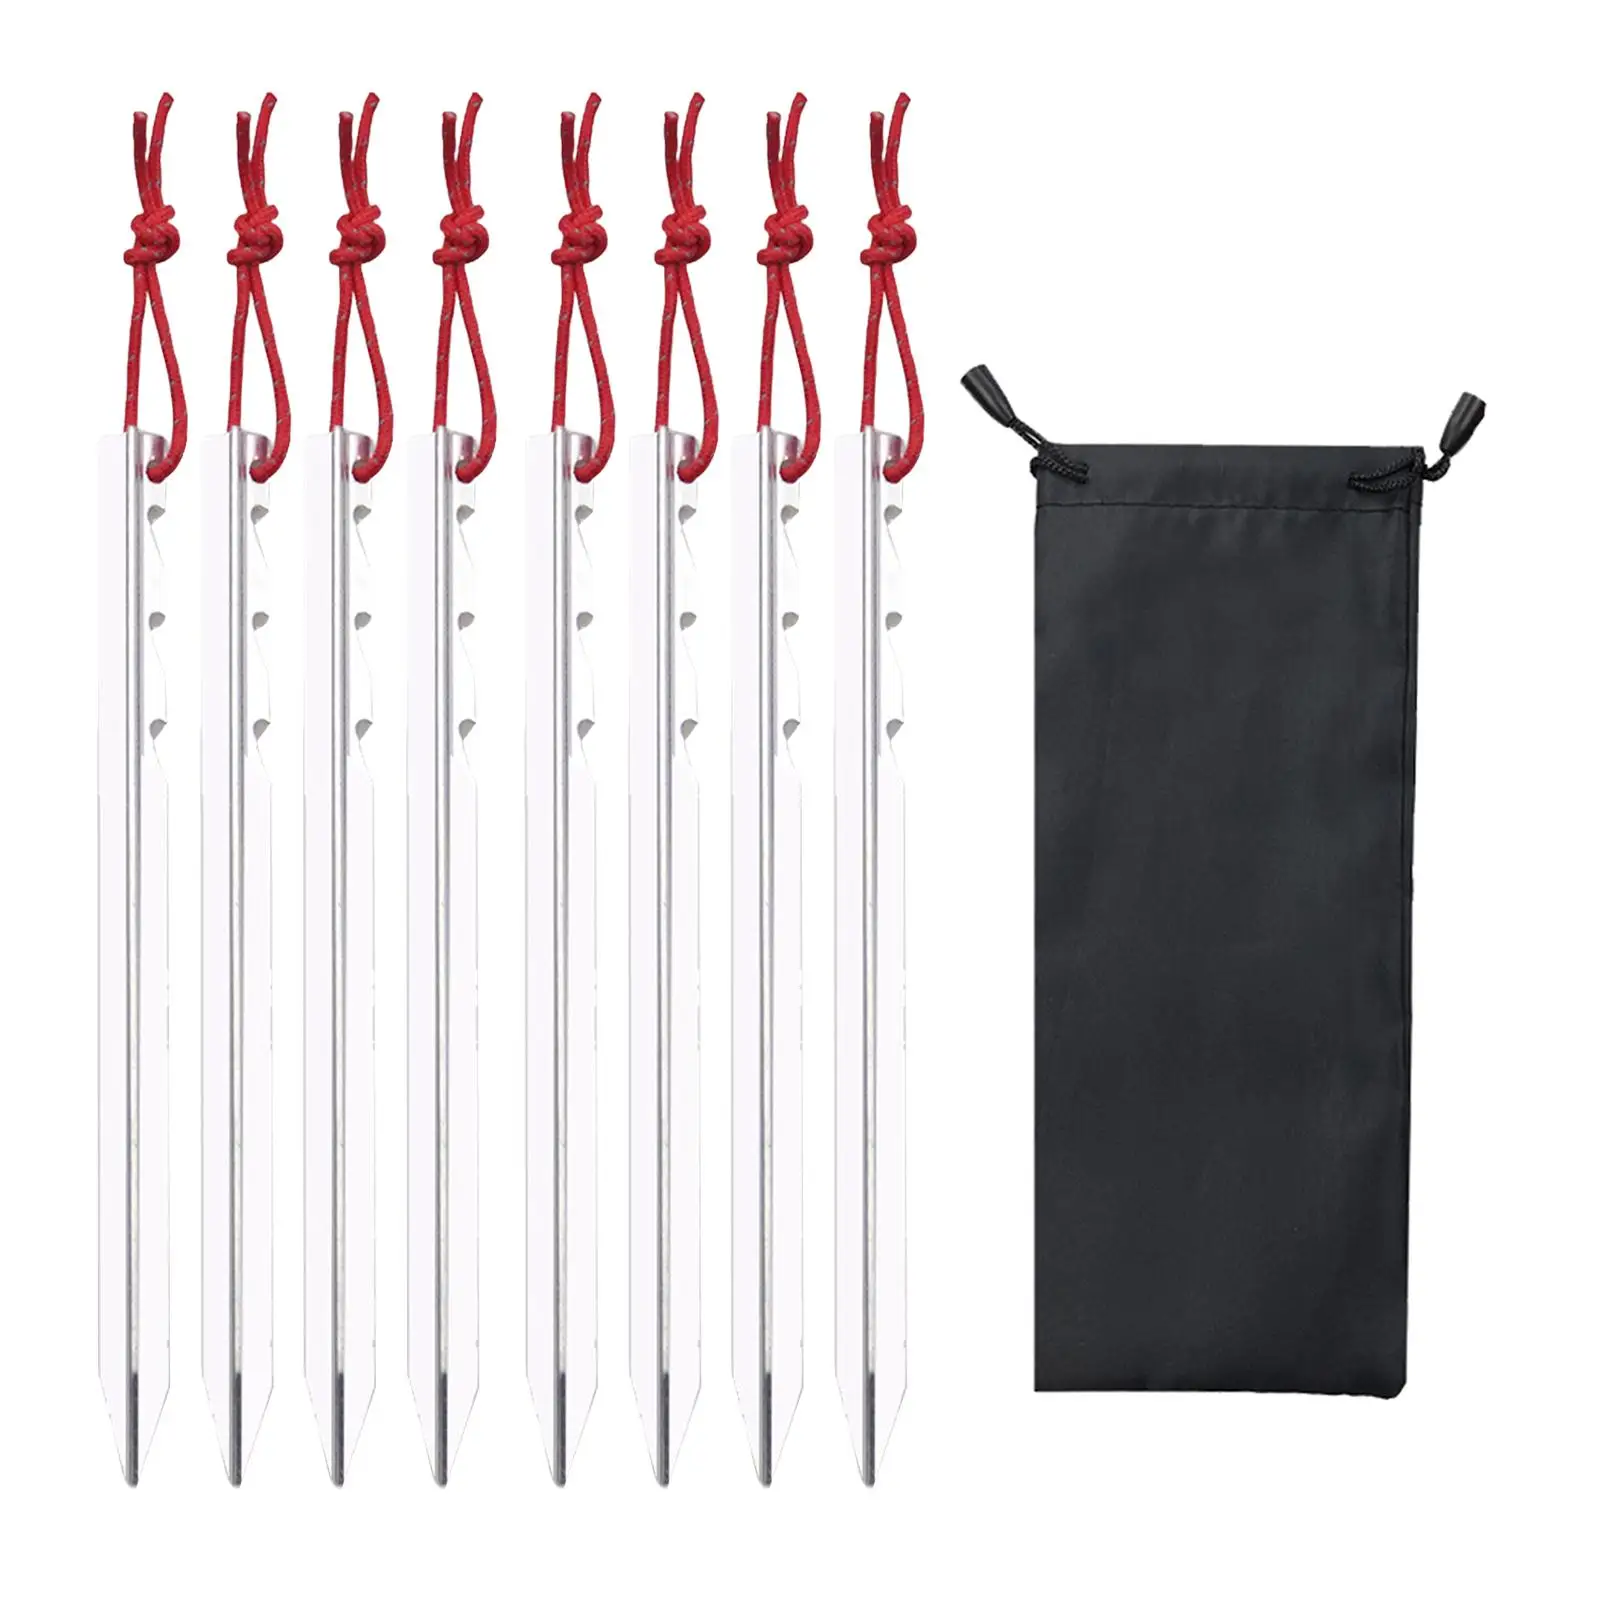 Tent Stakes with Carry Pouch Durable Lightweight Anchors Heavy Duty Tent Pegs Ground Pegs for Outdoor Gardening Hiking Tarp